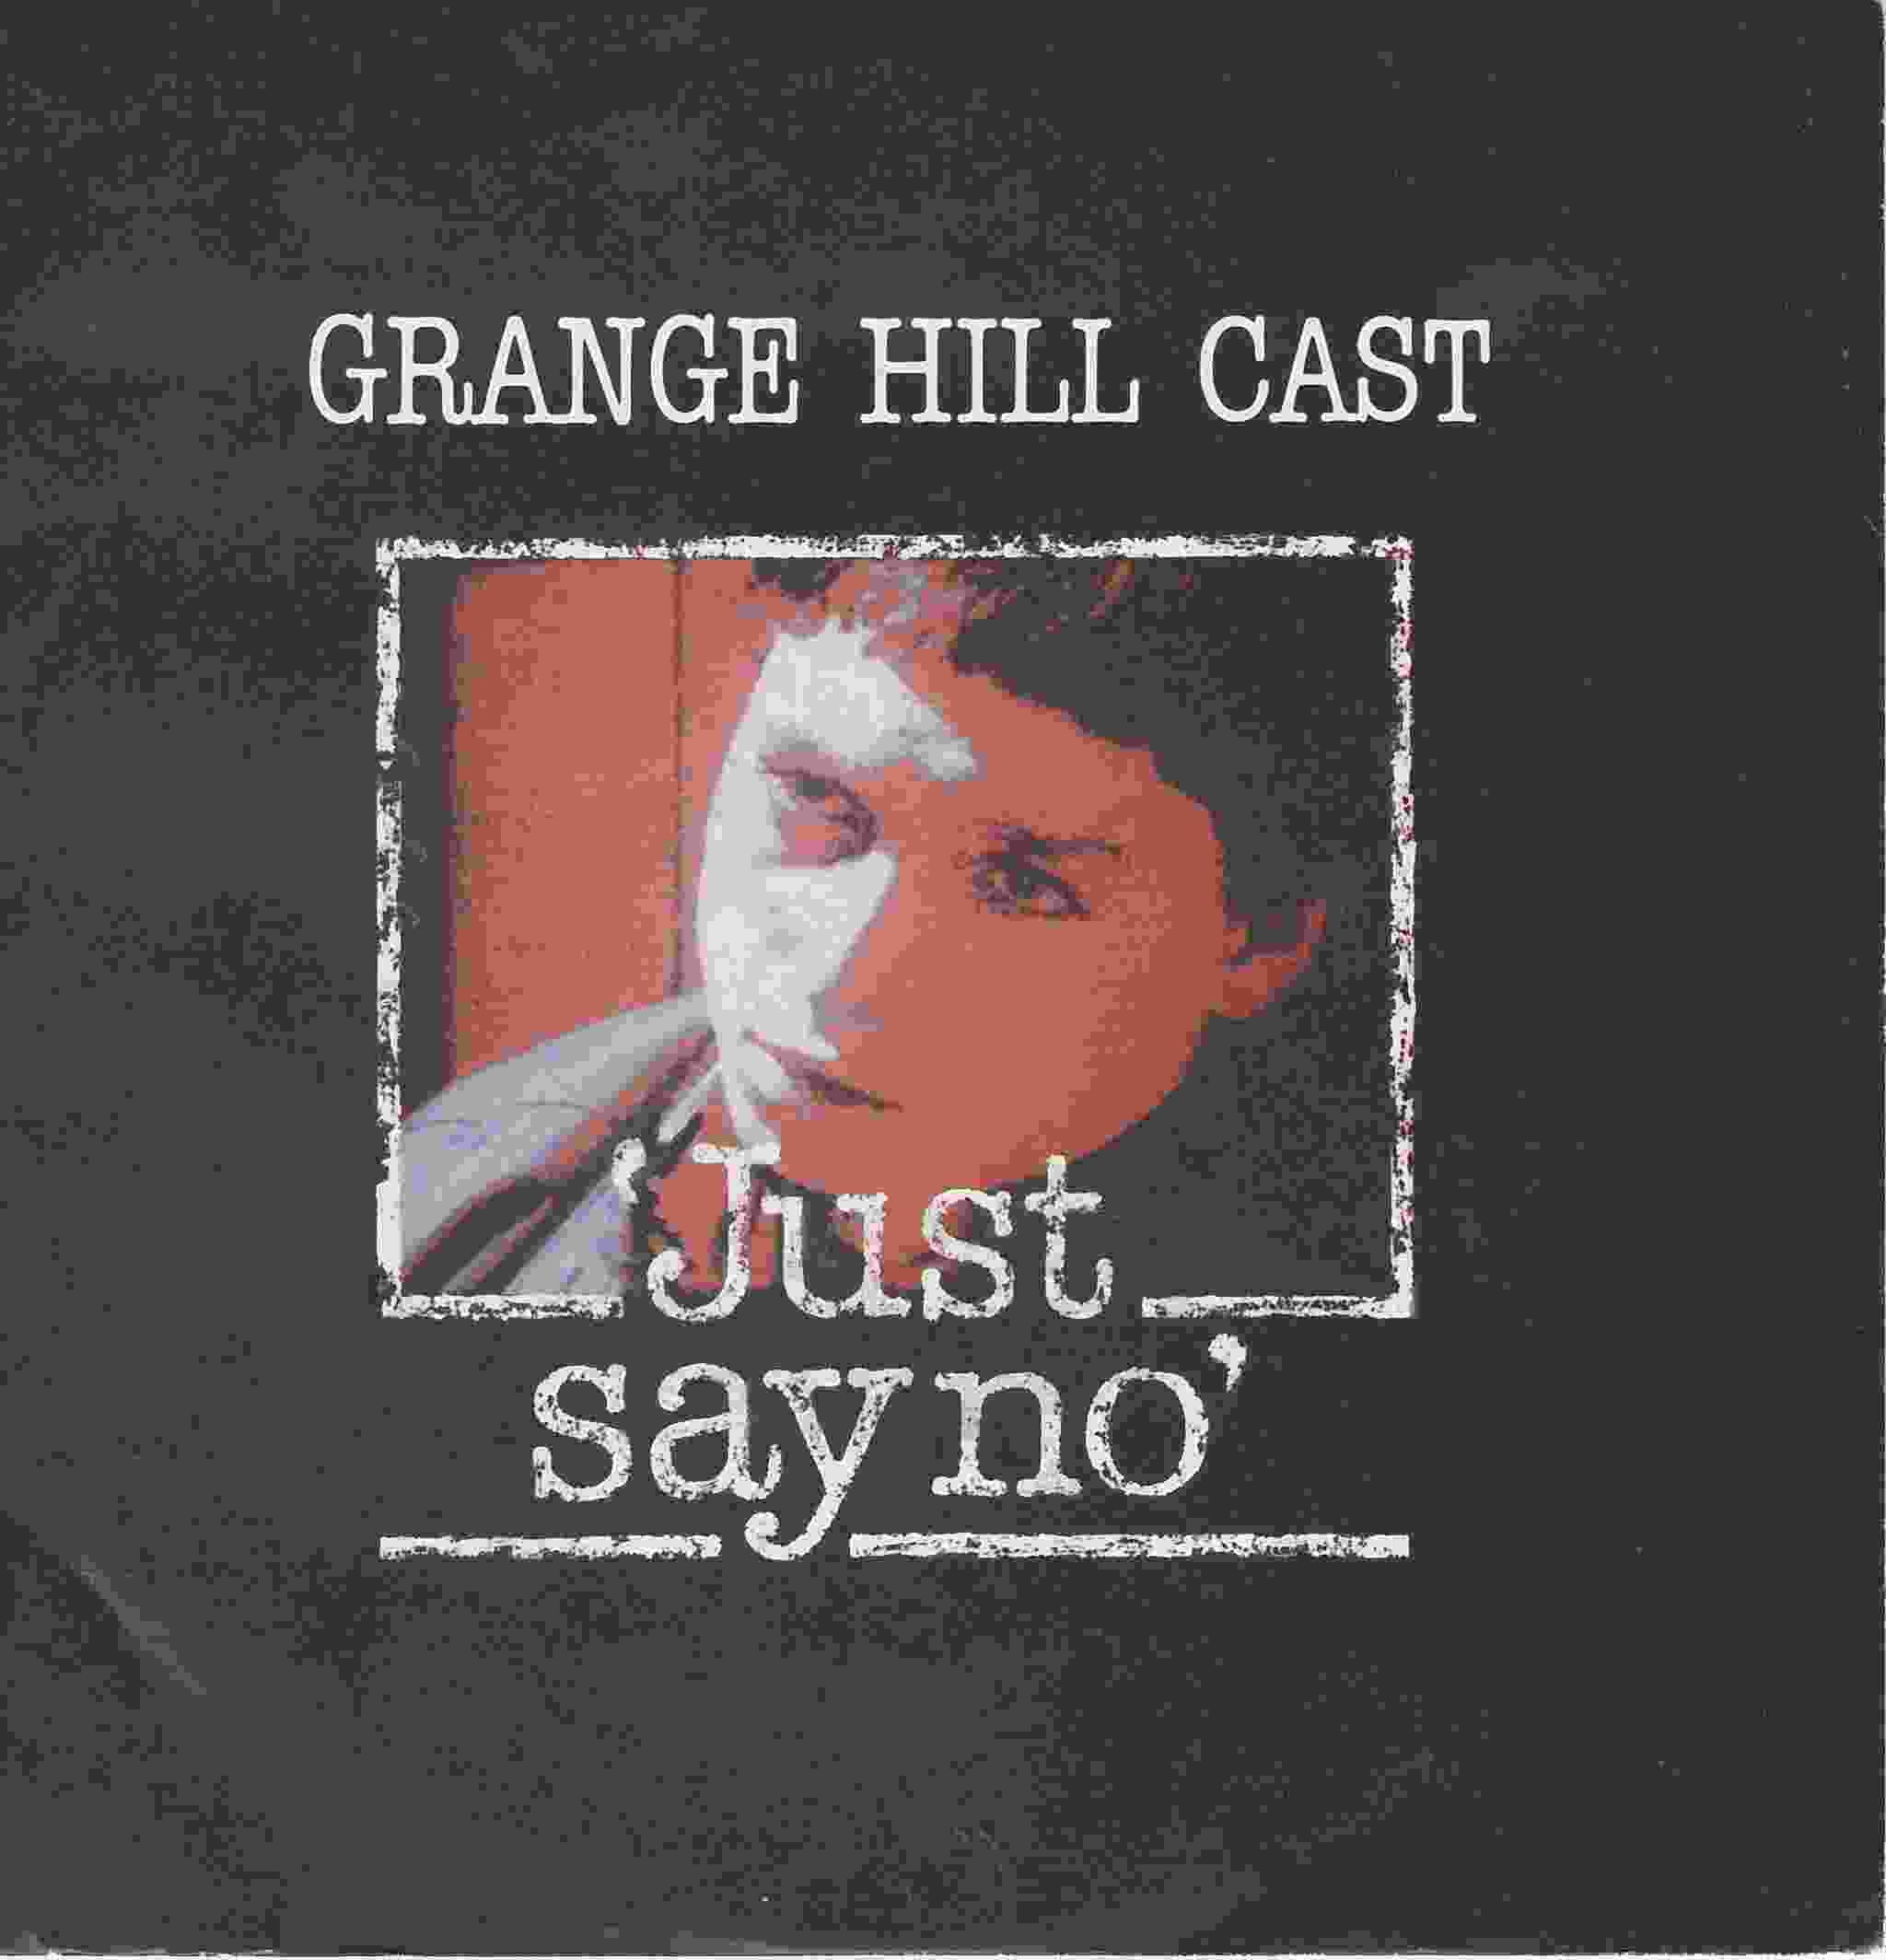 Picture of RESL 183 Just say no (Grange Hill) by artist Grange Hill cast from the BBC records and Tapes library